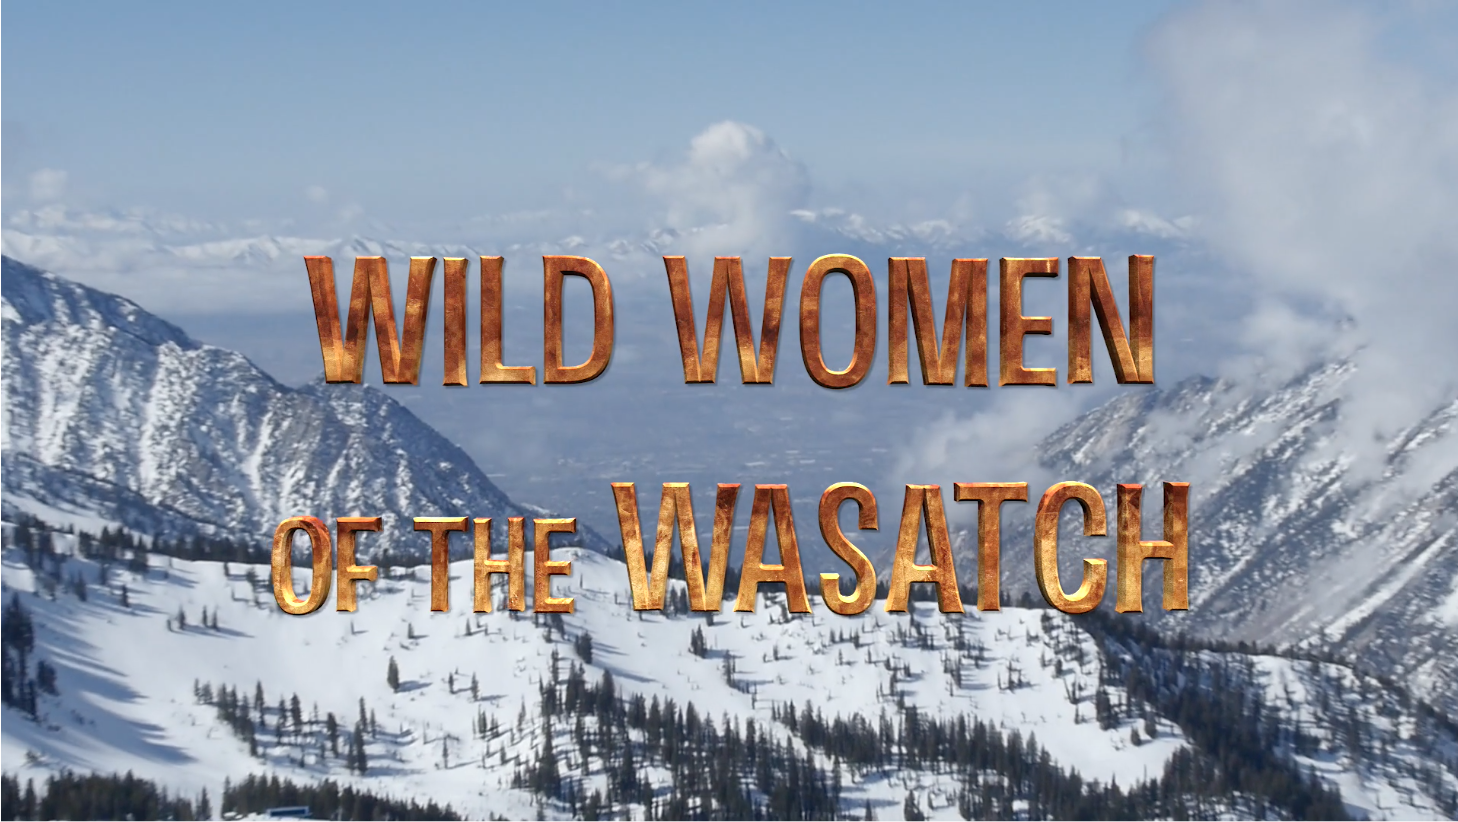 Wild Women of the Wasatch ep.01 Adaptive Sports